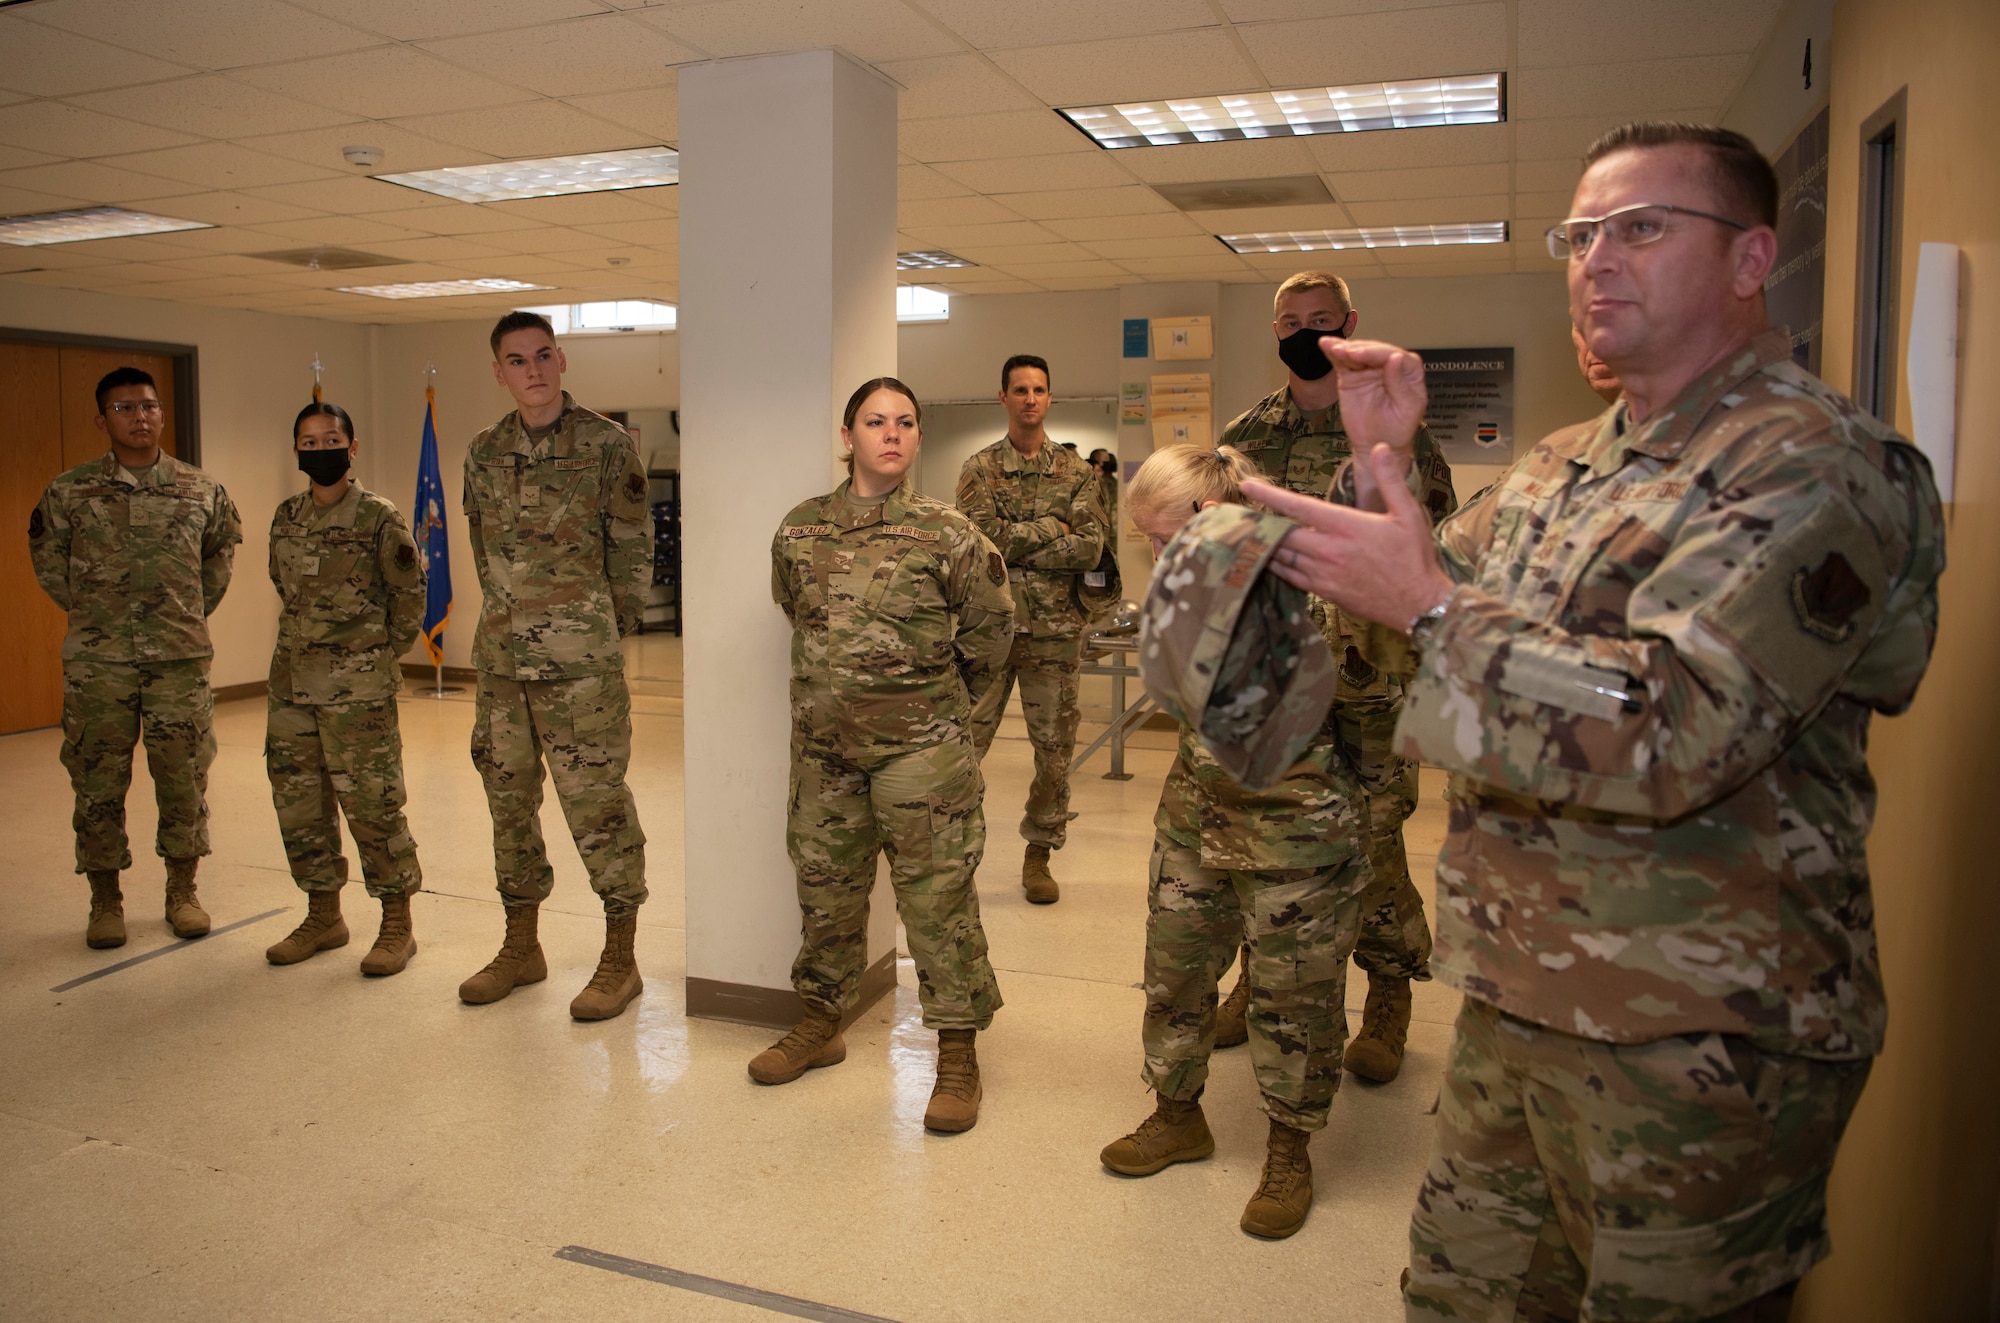 Command Chief Master Sgt. David Wade stands and talks with a group of Airmen in a room.